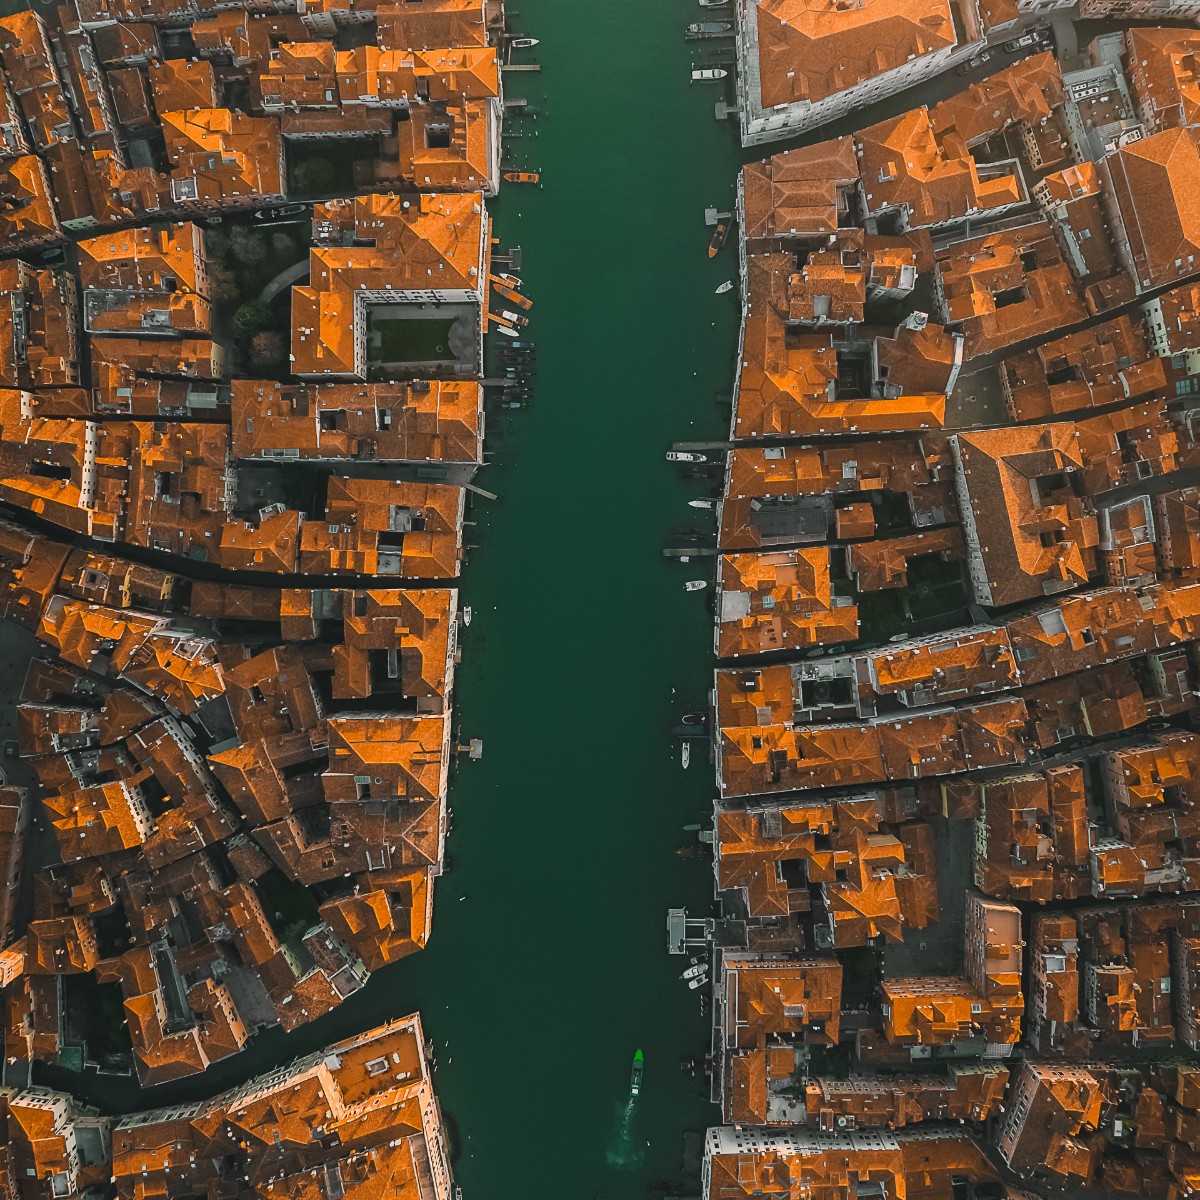 Sunrise in Venice 🌅
🚁 DJI Mavic 3 
📷 @andreacaruso_
Share your photos or videos on #SkyPixel 👉brnw.ch/21wJHPe